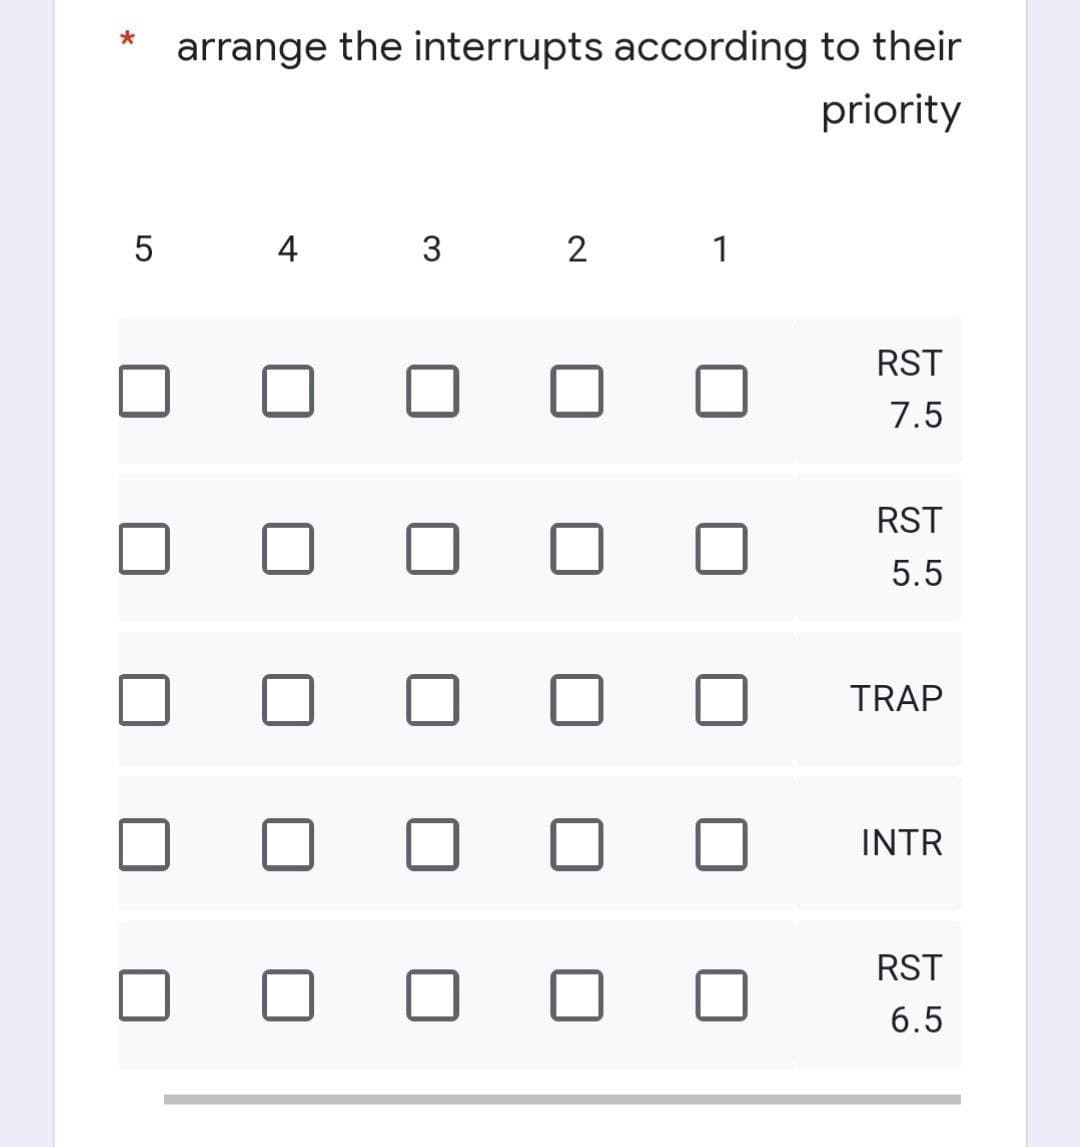 arrange the interrupts according to their
priority
5
4
3
2
1
RST
7.5
RST
5.5
TRAP
INTR
RST
6.5
